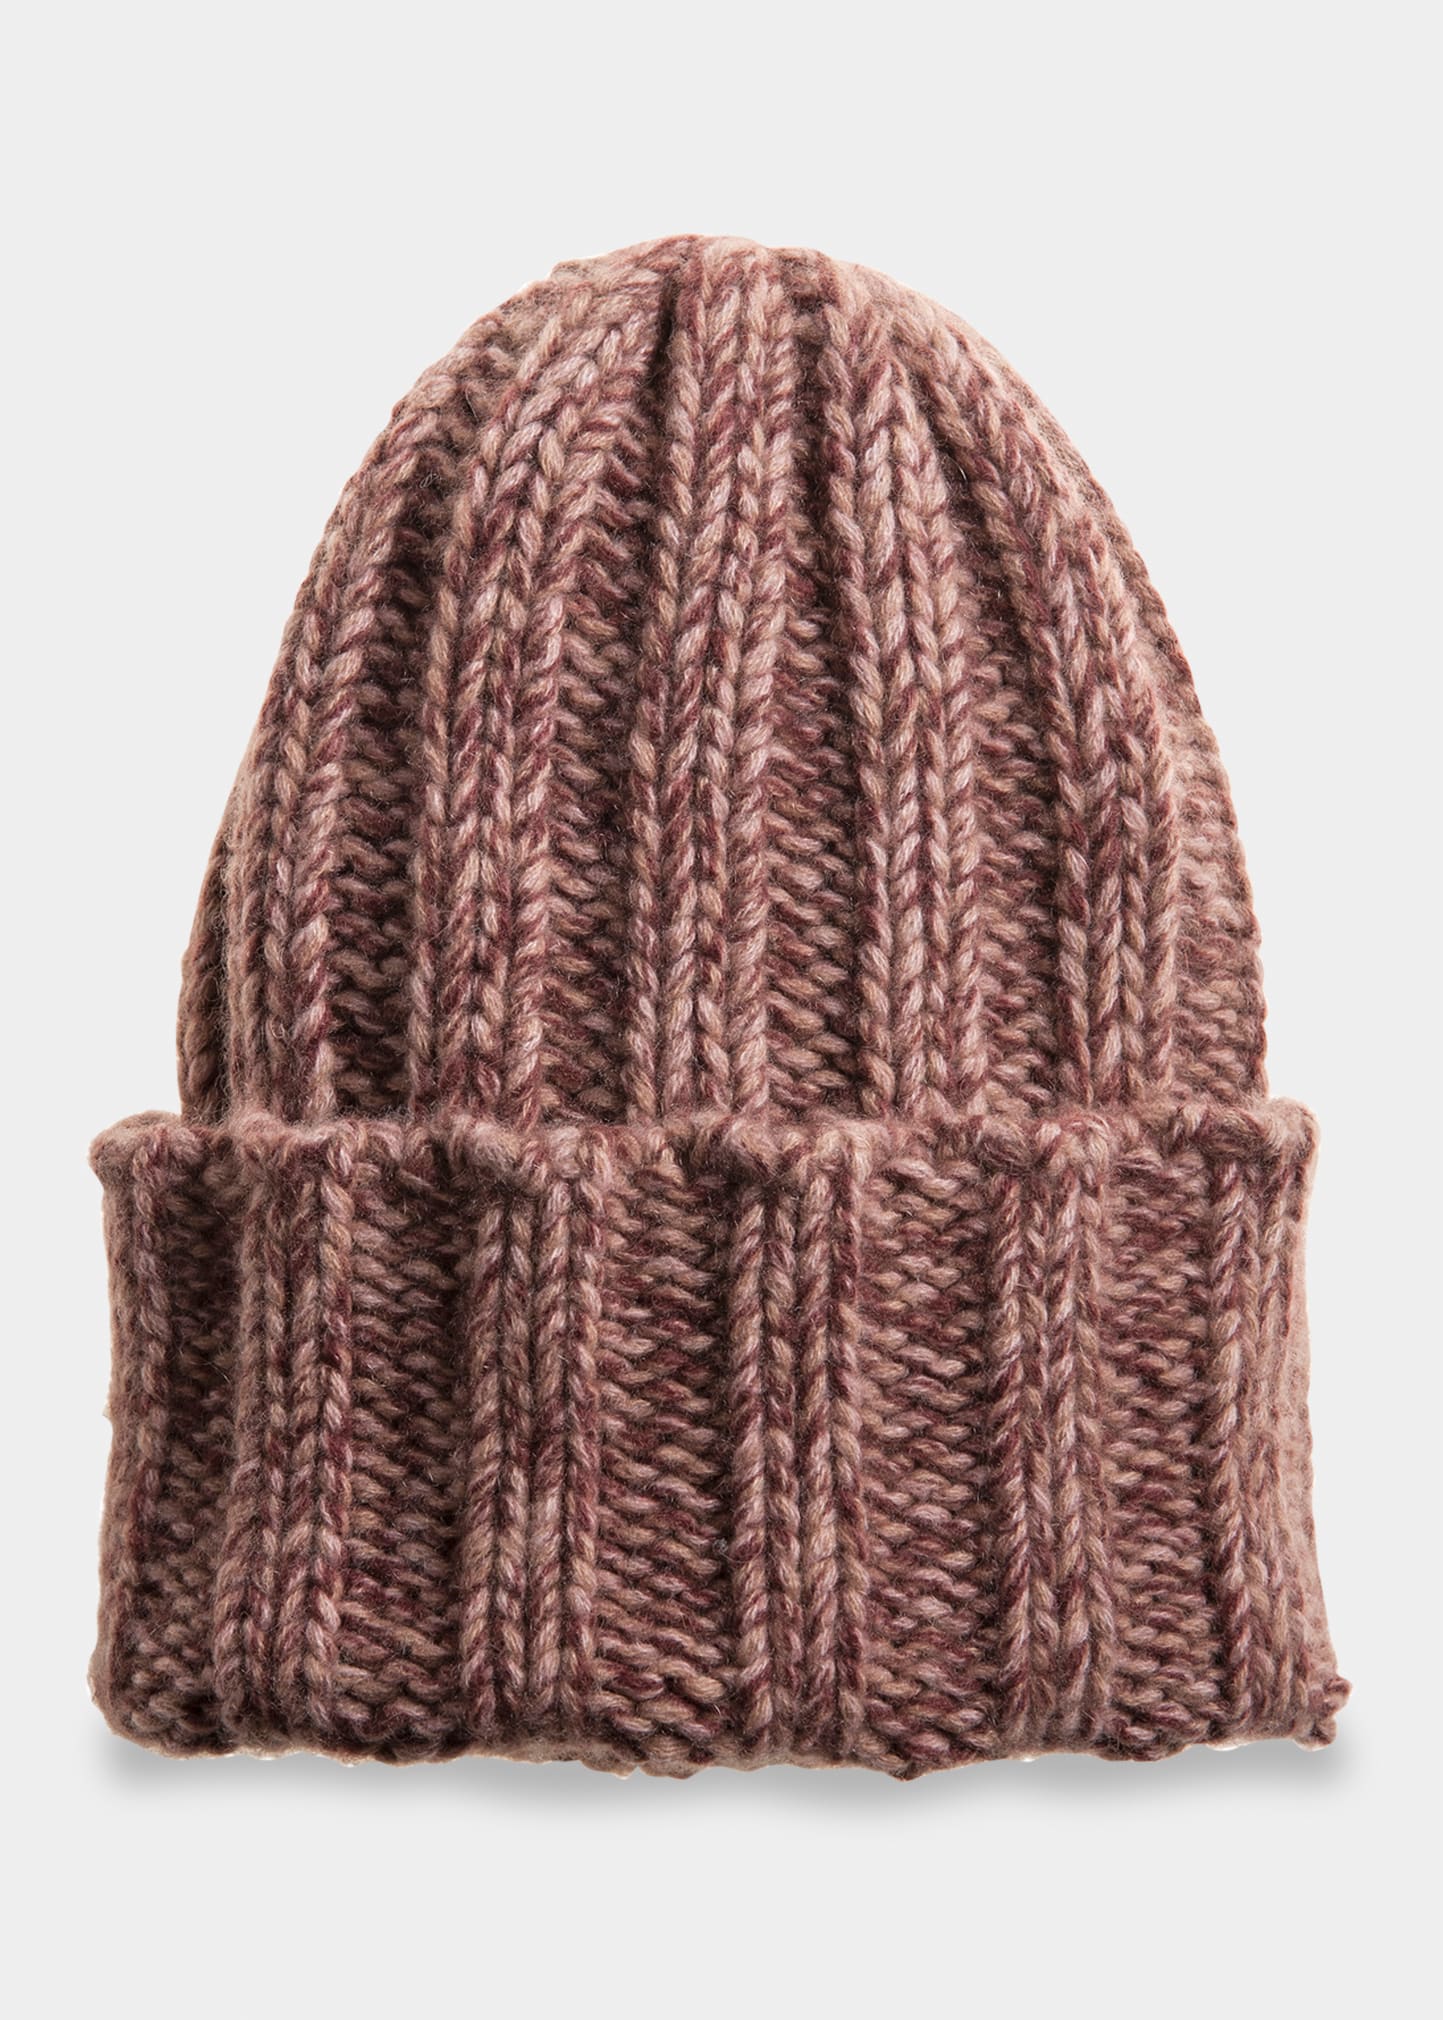 Inverni Men's Chunky Rib-knit Cashmere Beanie Hat In Red Marl